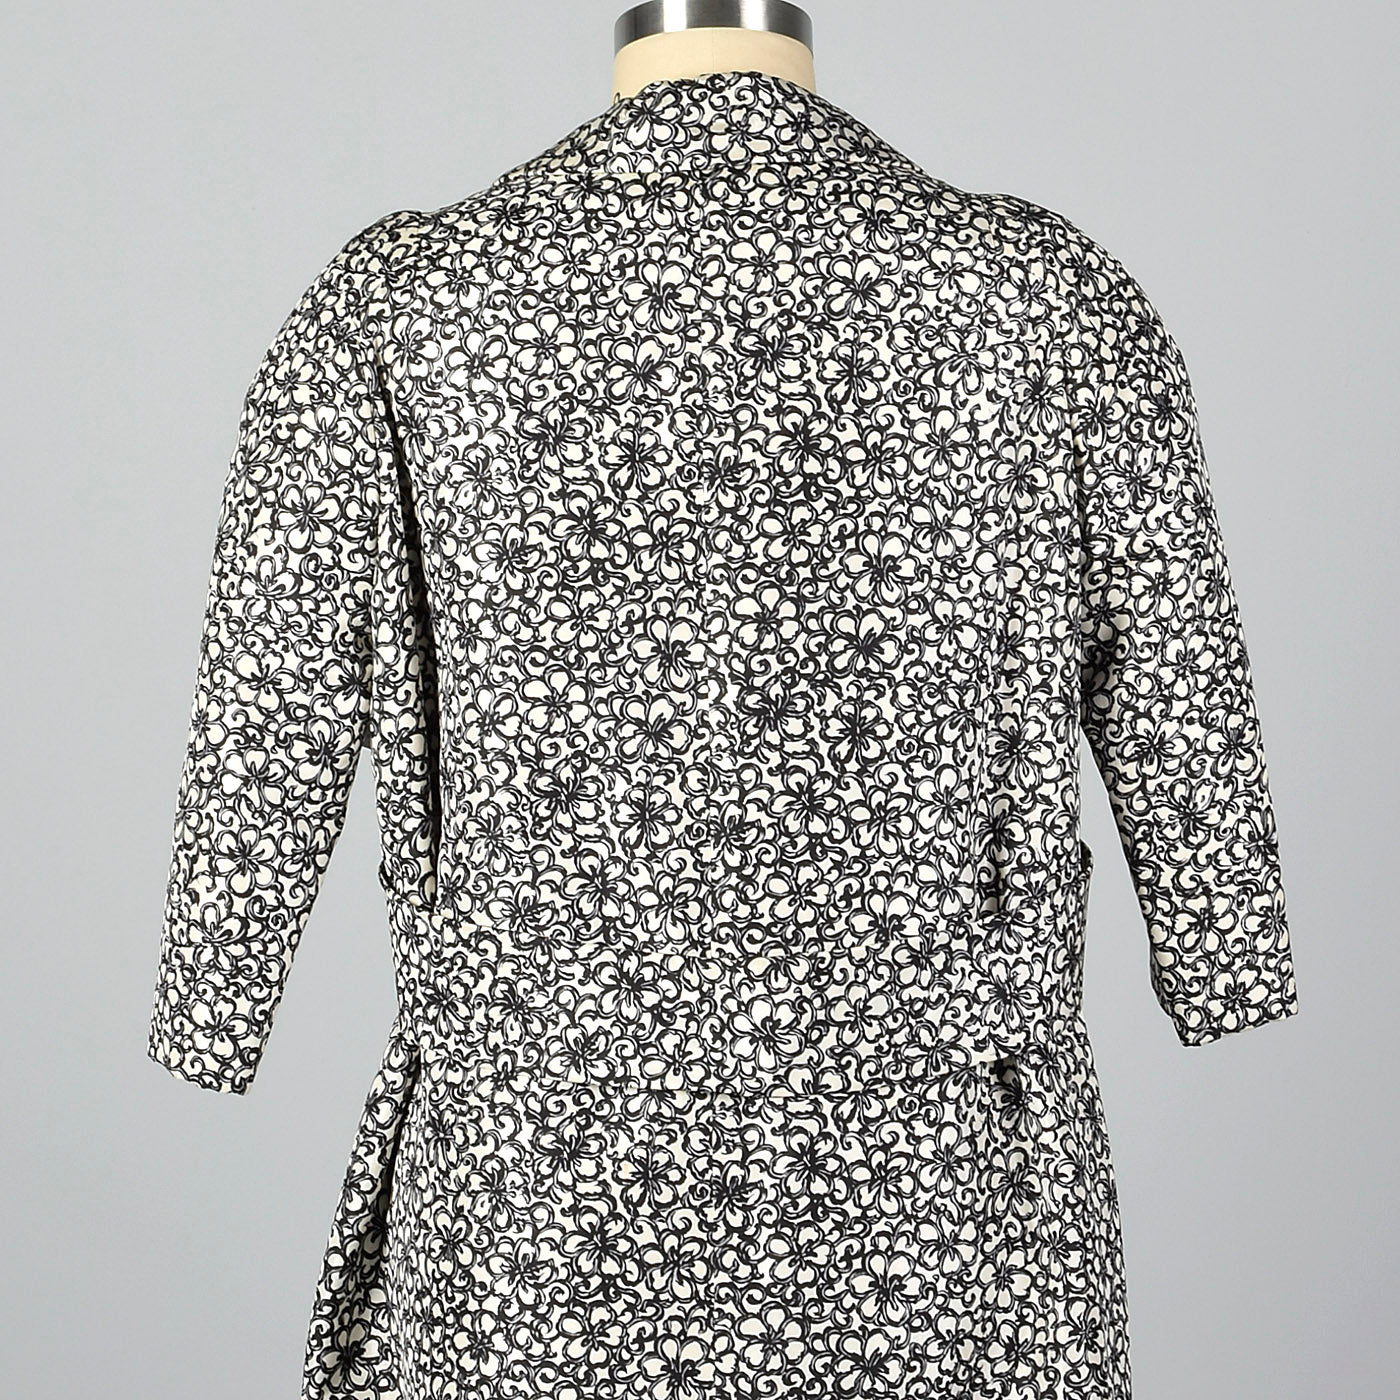 1960s James Galanos Formal Silk Opera Coat in a Black and White Floral